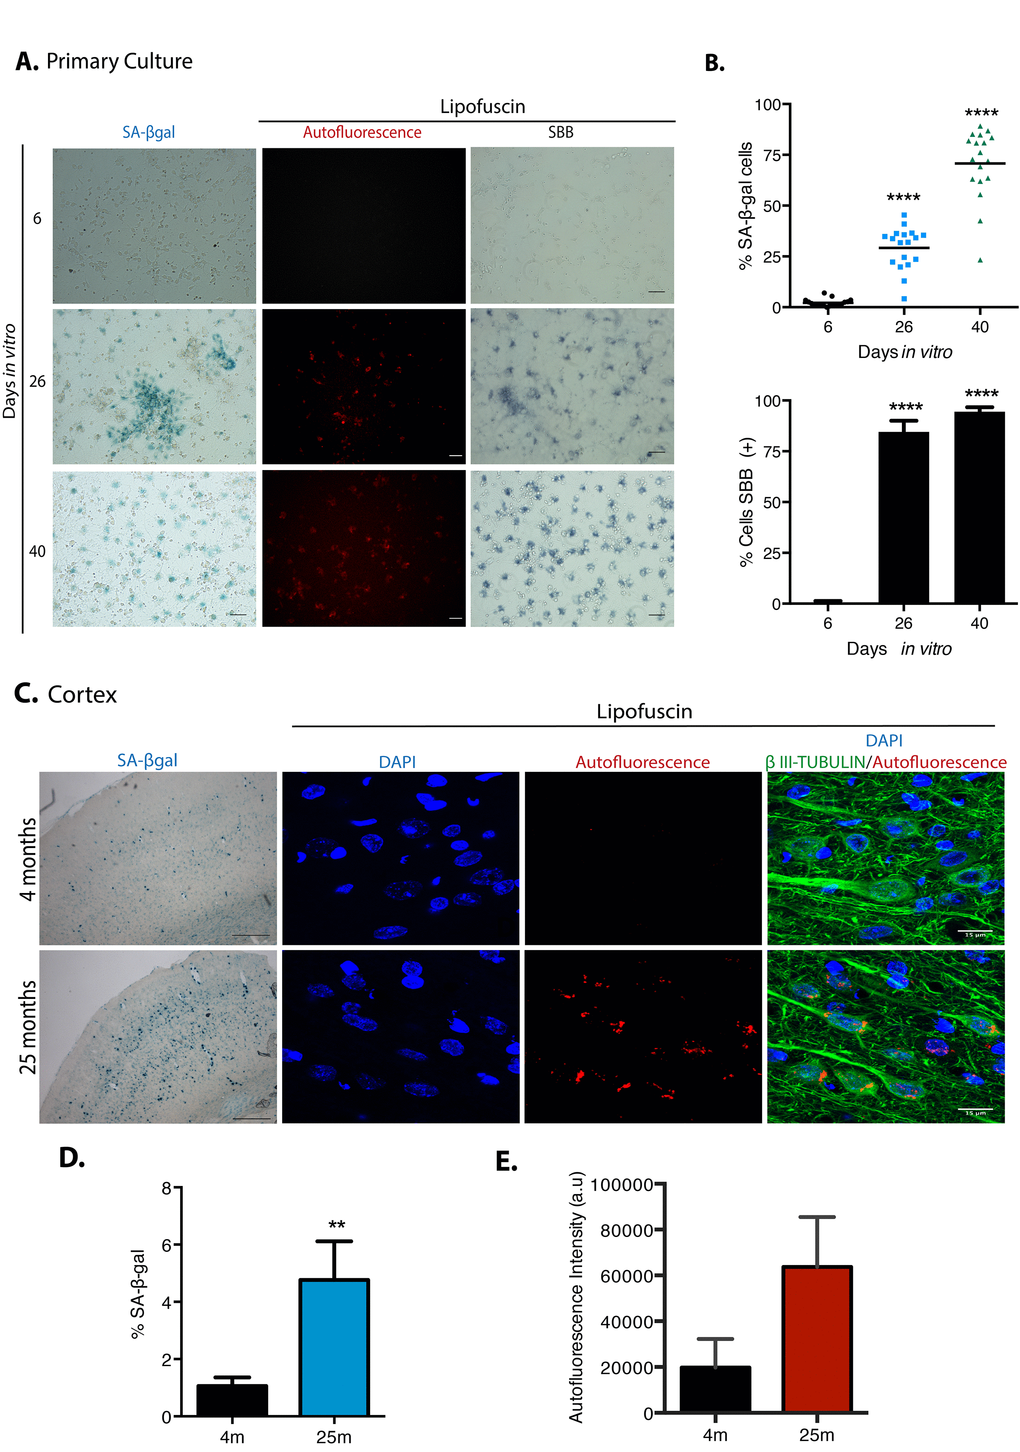 Cortical cells in long-term culture and in old rat brains had higher SA-β-gal activity and accumulated lipofuscin. (A) SA-β-gal activity or lipofuscin accumulation detected by autofluorescence or by Sudan Black B (SBB) staining were detected in primary rat cortical cells cultured for the indicated DIV. Notice that cortical cells have higher SA-β-gal activity and lipofuscin from 26 DIV. Images are representative of at least three independent experiments. Scales bar represent 100 μm. (B) Percentage of SA-β-gal or SBB positive cells in the cultures incubated at the indicated DIV. Quantification was made using NIS Elements software. The mean of three independent experiments, each done by quintupled replicas, is graphed. Bars in graphs represent SEM. Two-way RM ANOVA analysis, with Dunnett´s multiple comparison test. **** pIV. (C) Cortical neurons in old brains had higher SA-β-gal activity (scale bars represent 500 μm) and accumulated lipofuscin. Scale bar represents 15 μm. (D) The percentage of SA-β-gal positive area within each brain section is plot. The average of three brains per age is graphed; 15 sections from each brain were quantified. Bars in graphs represent SEM. Unpaired t Test, ** pE) Quantification of autofluorescence intensity per section (arbitrary units). Bars in graphs represent SD. The average of three brains per age is graphed; 15 sections from each brain were quantified. Even though there was an evident increase in autofluorescence, no statistical significance was obtained.